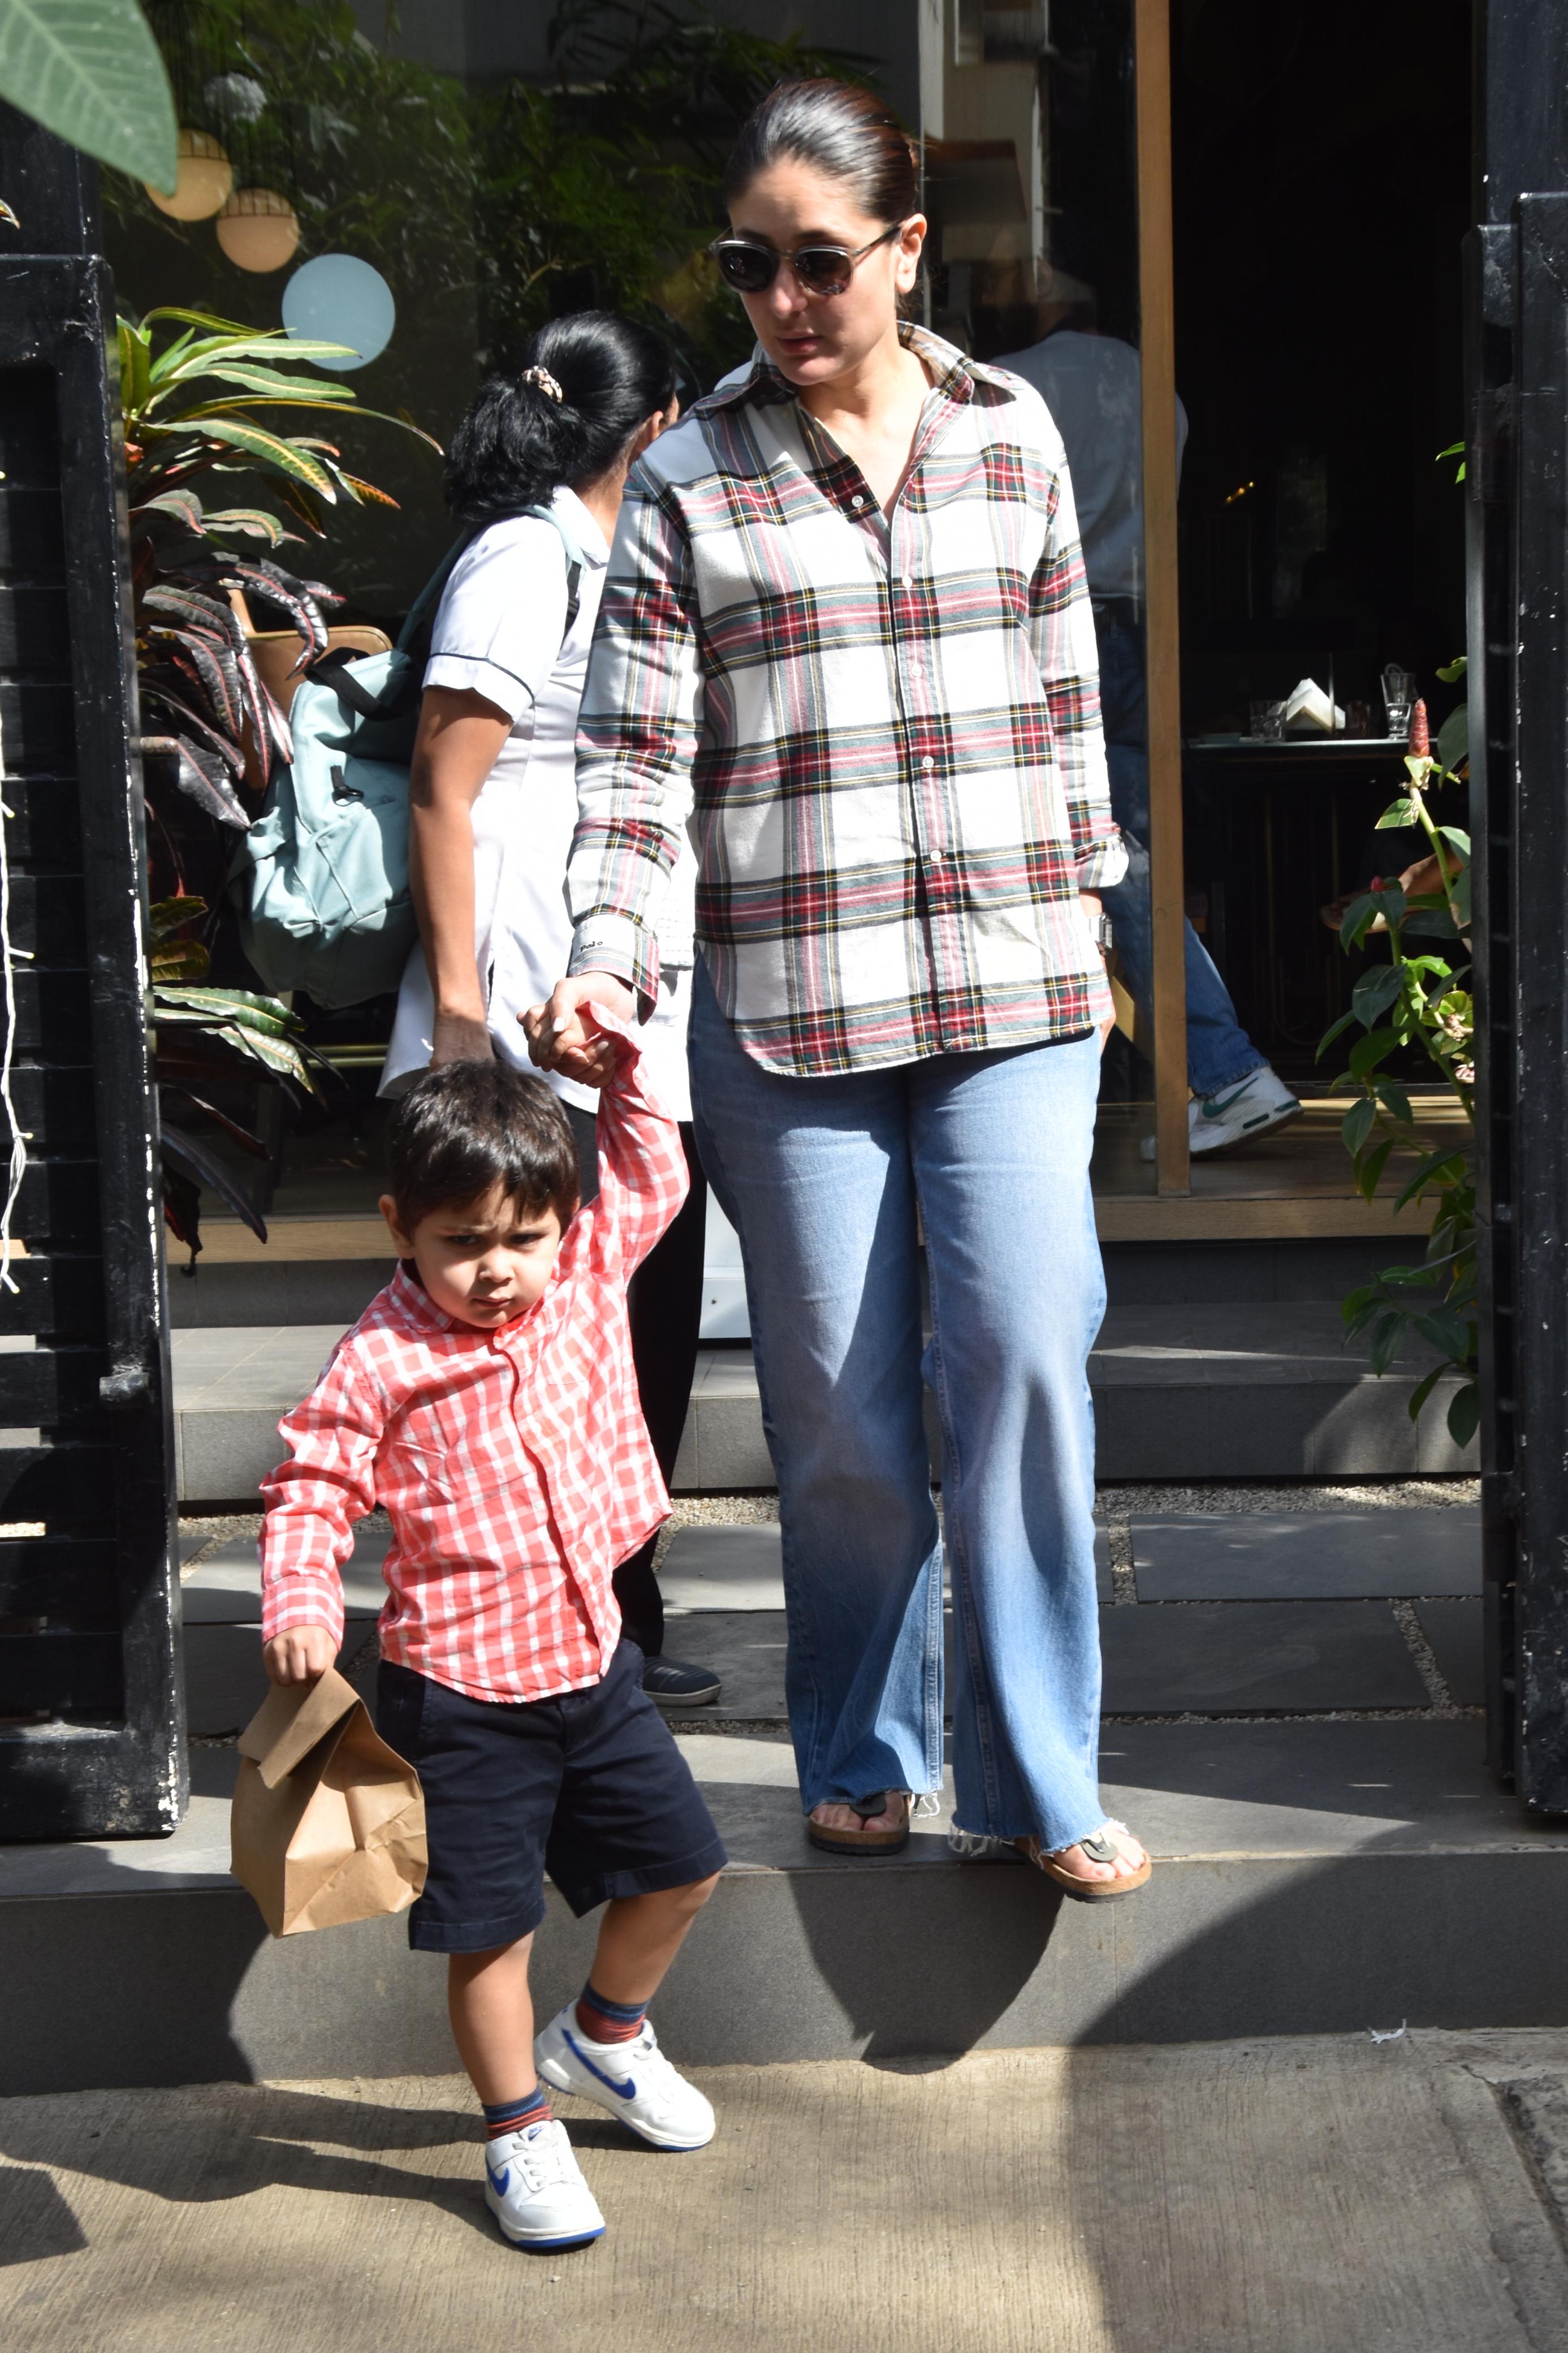 Kareena Kapoor was seen with her little on Jeh as they exited their favourite restaurant